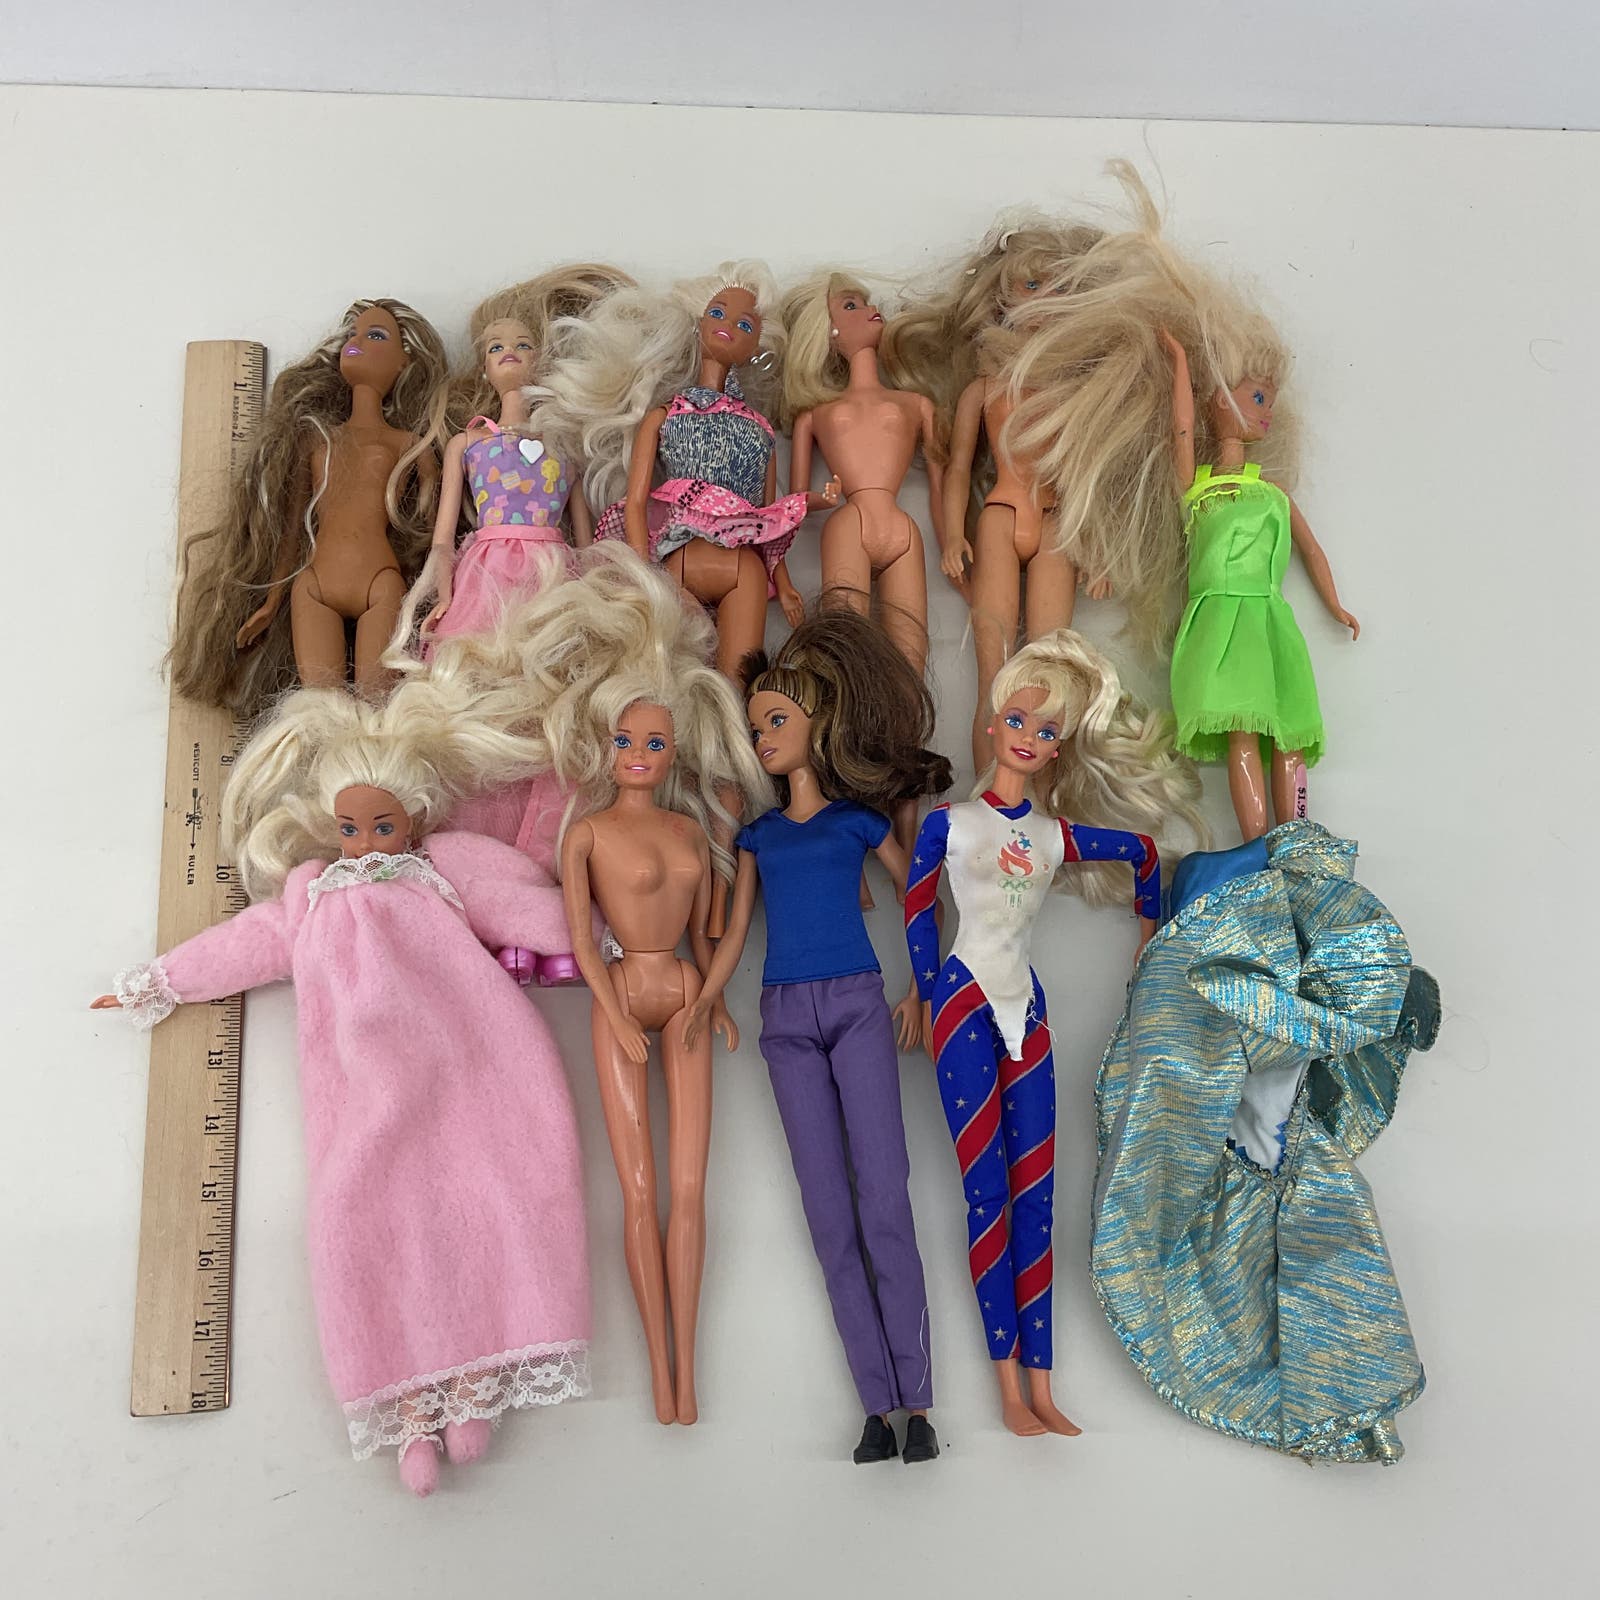 Loose Mixed LOT Mattel Barbie & Others Fashion Dolls Blonde Hair Used - Warehouse Toys